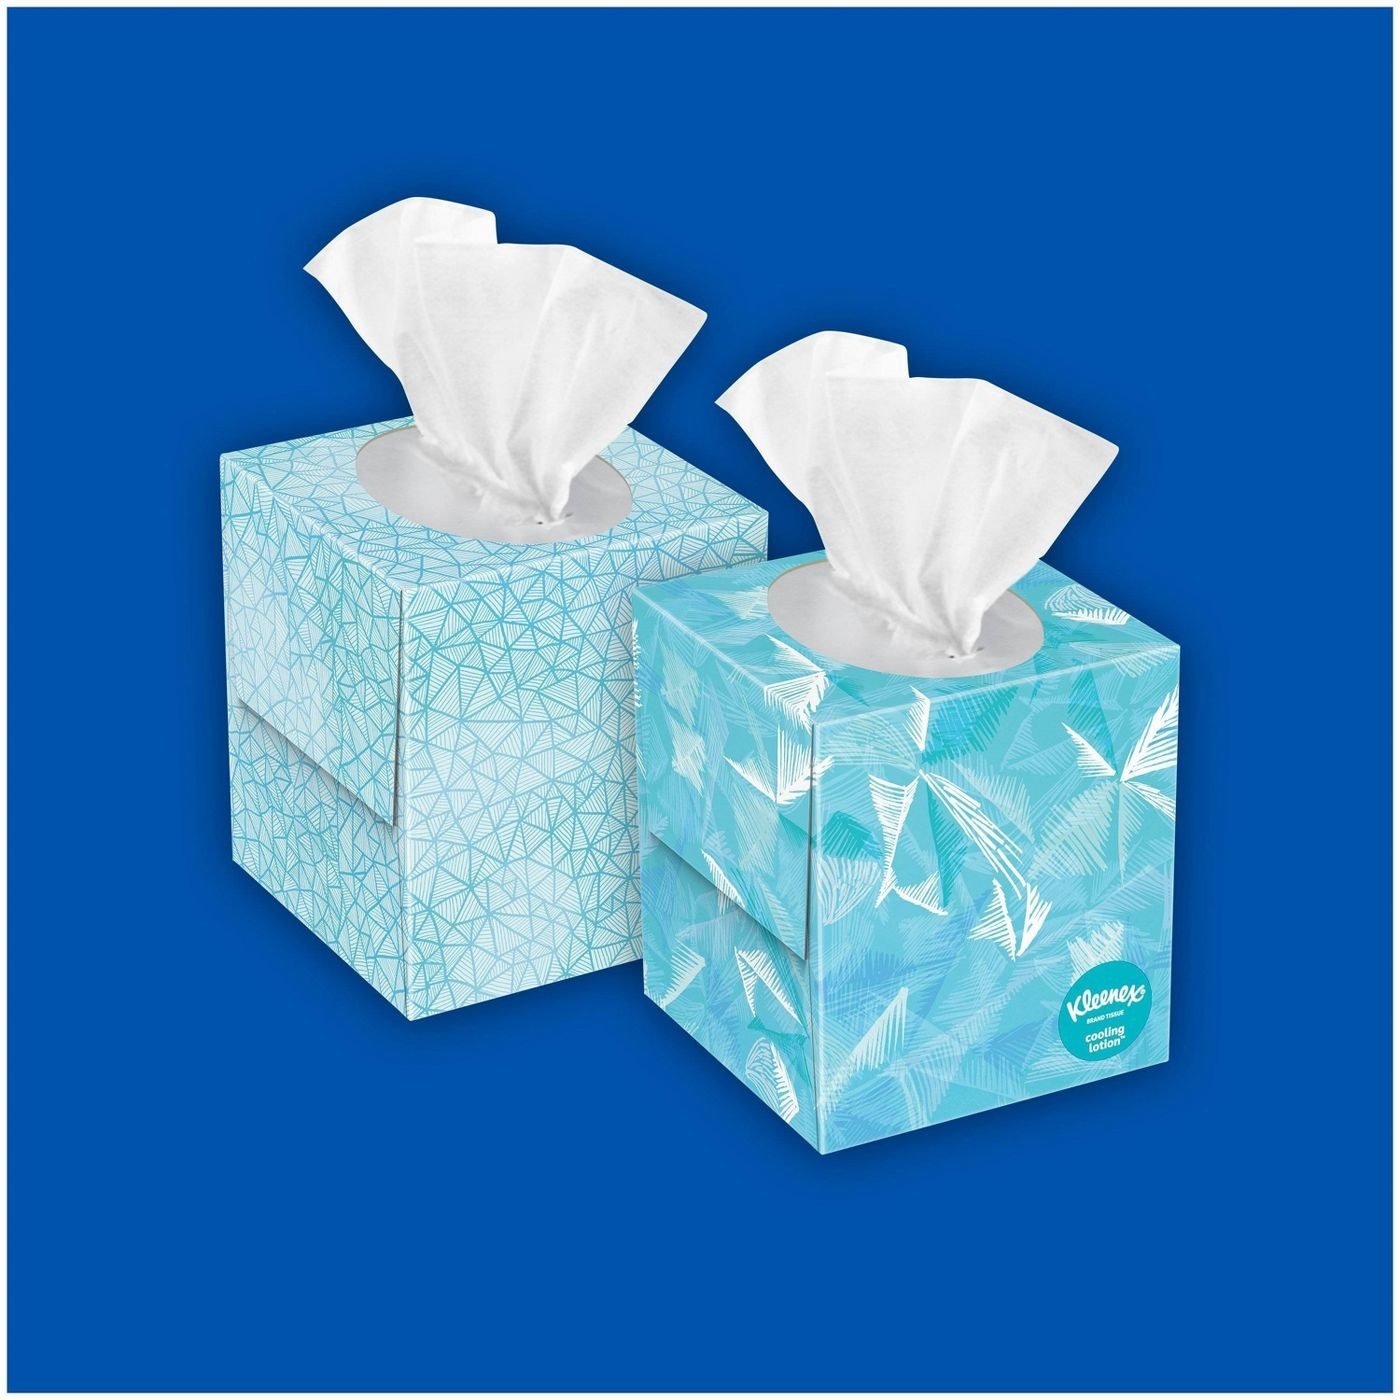 The Kleenex cooling lotion facial tissues